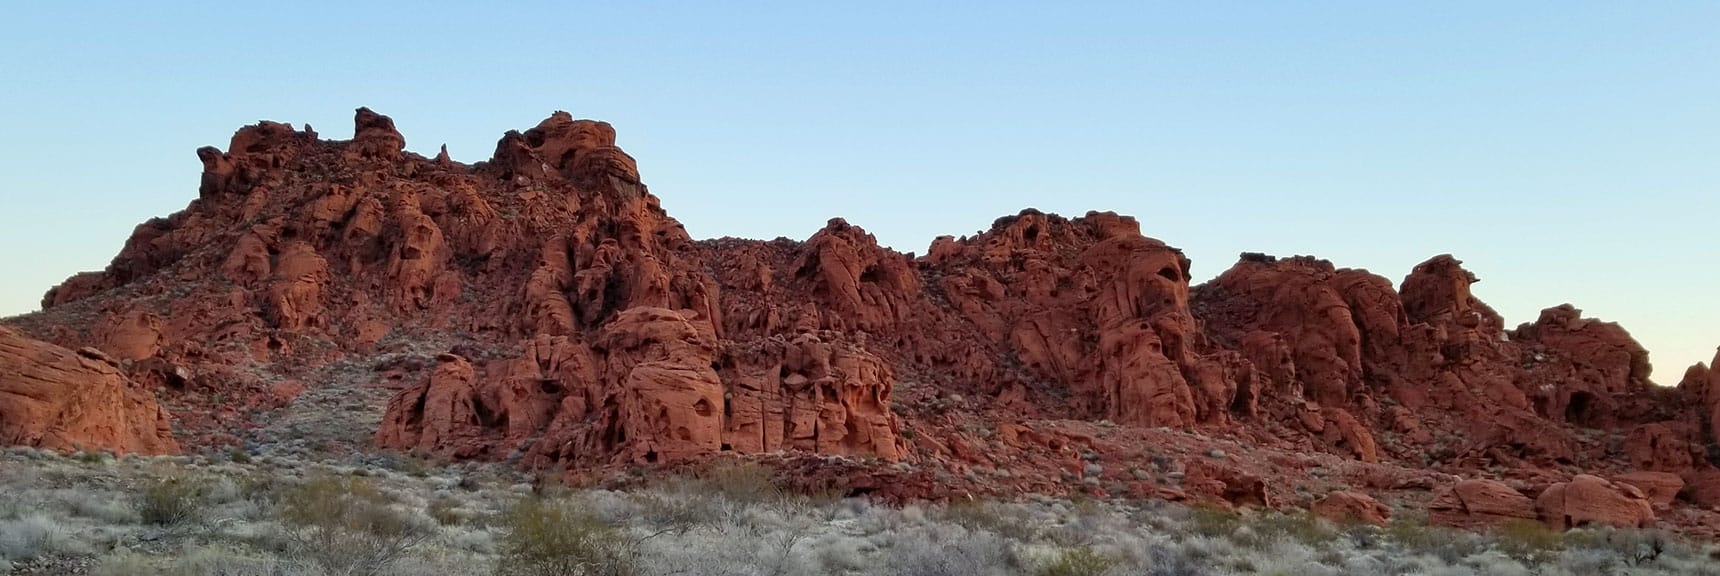 Rock Formations Just Beyond the Entrance of Valley of Fire State Park, Nevada